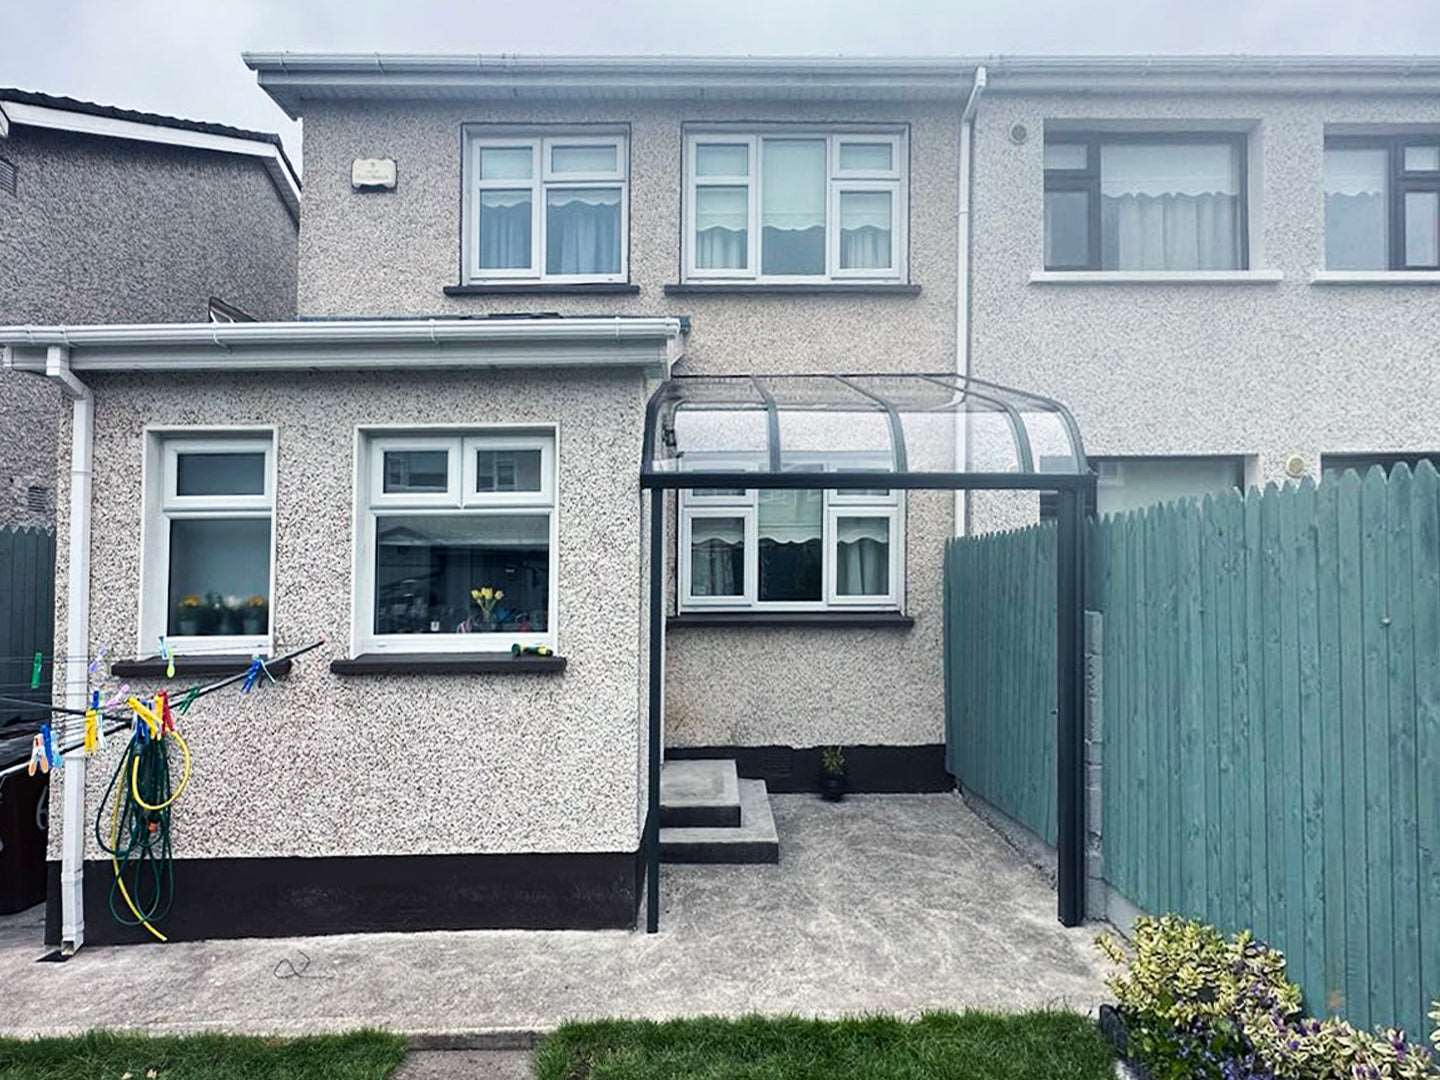 Aluminum Canopy manufacturers and installers in Ireland